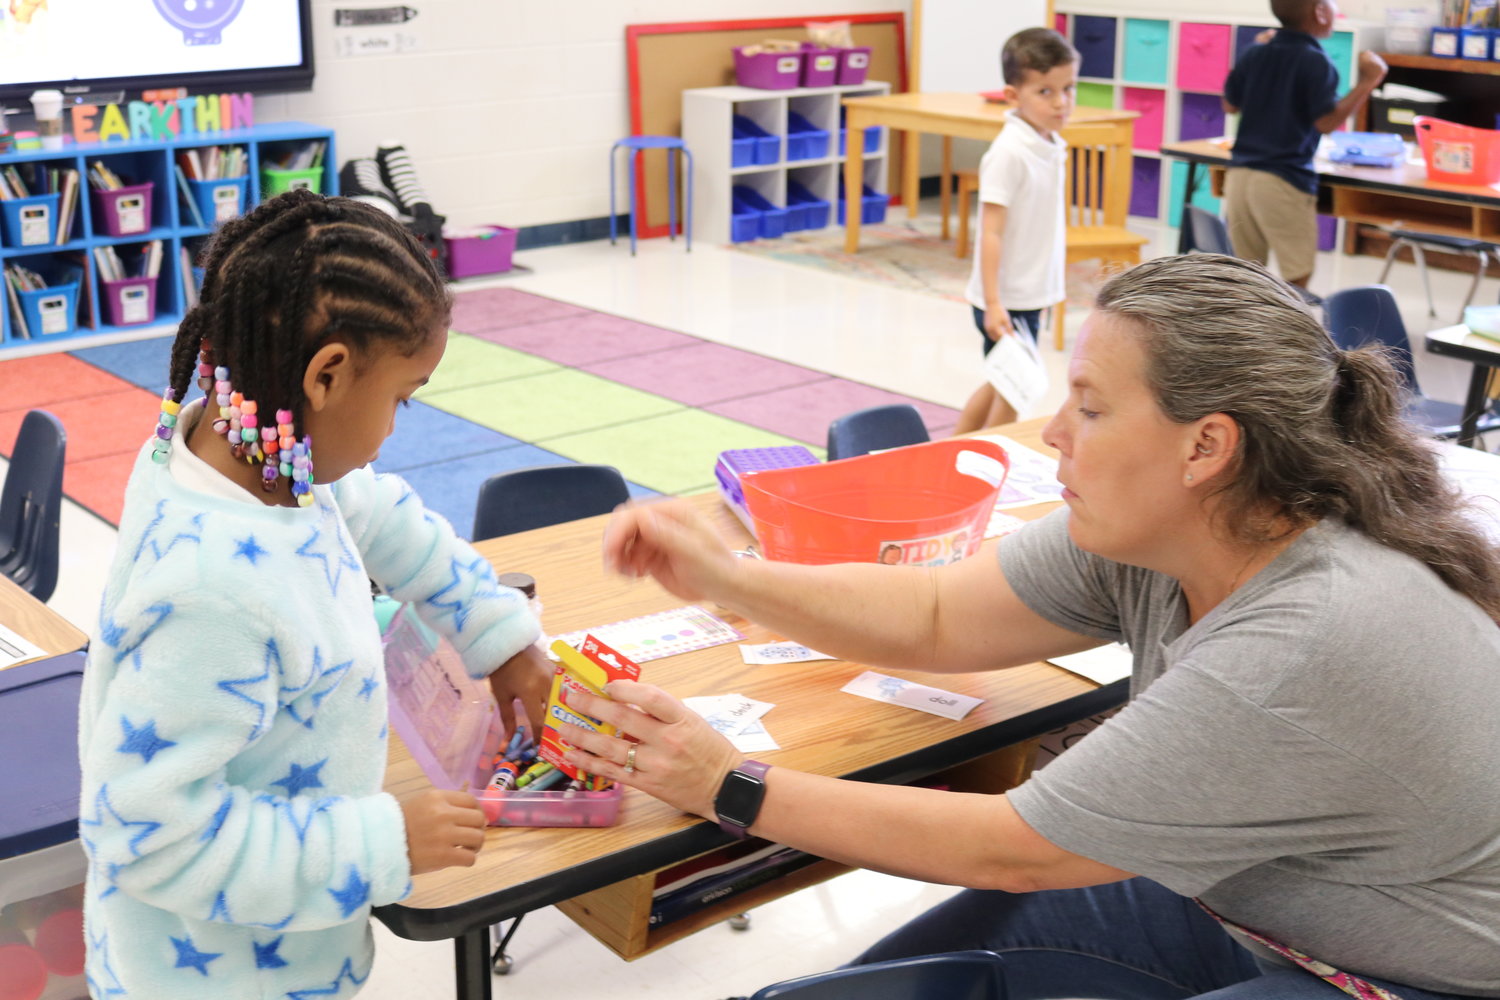 Part-time aides and behavior coaches join teachers in classrooms, assisting with younger children adjusting to the return to school.